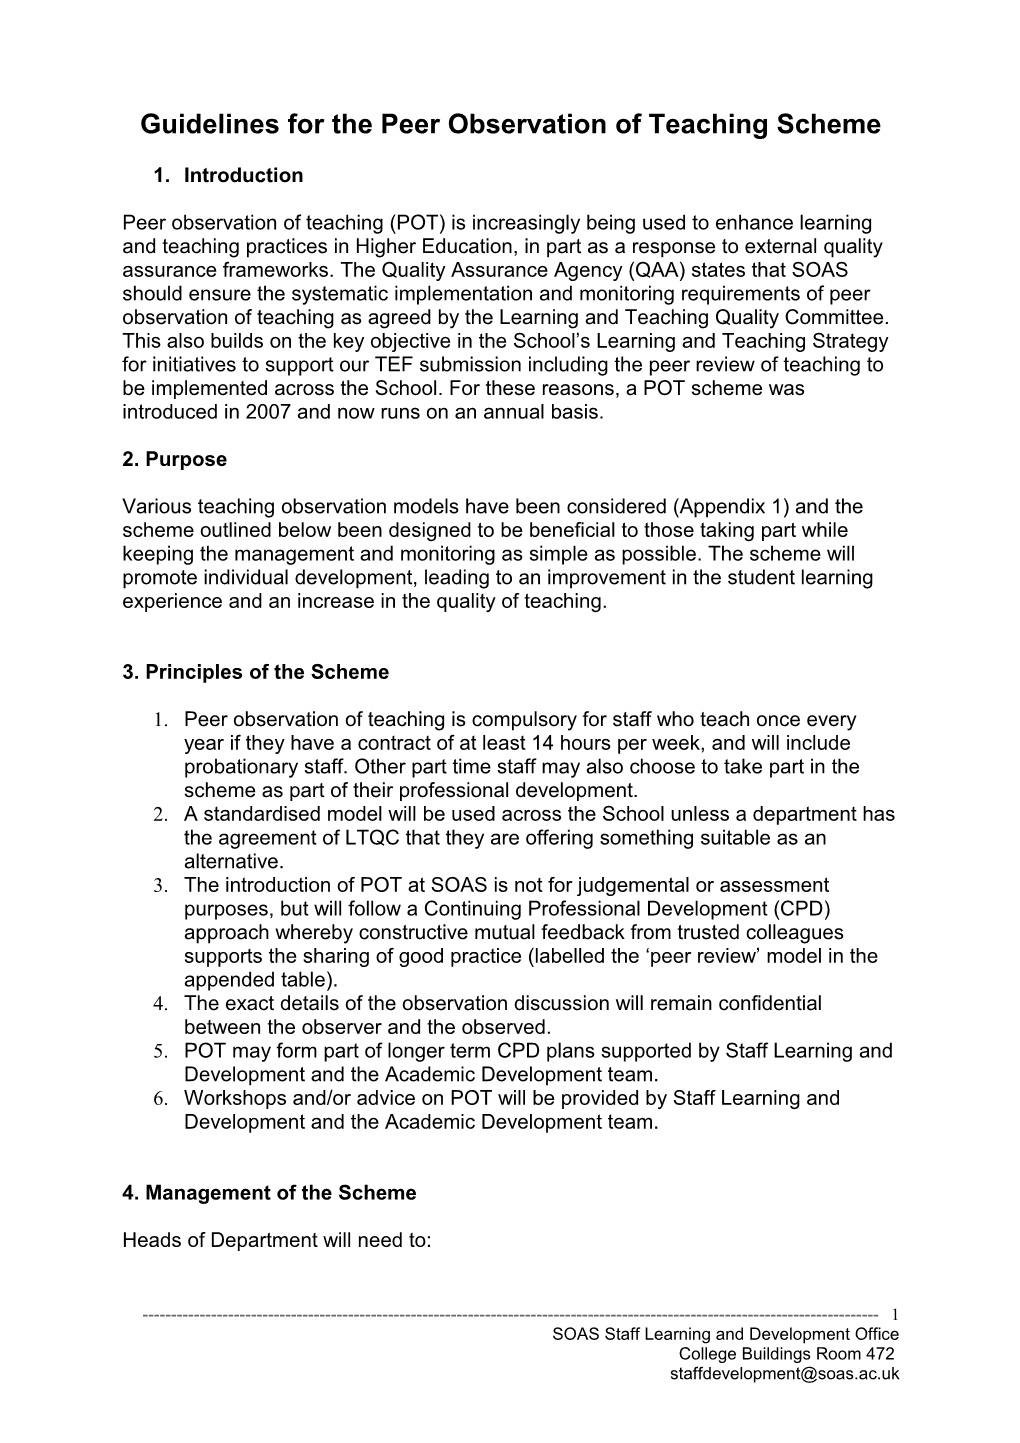 Guidelines for the Peer Observation of Teaching Scheme